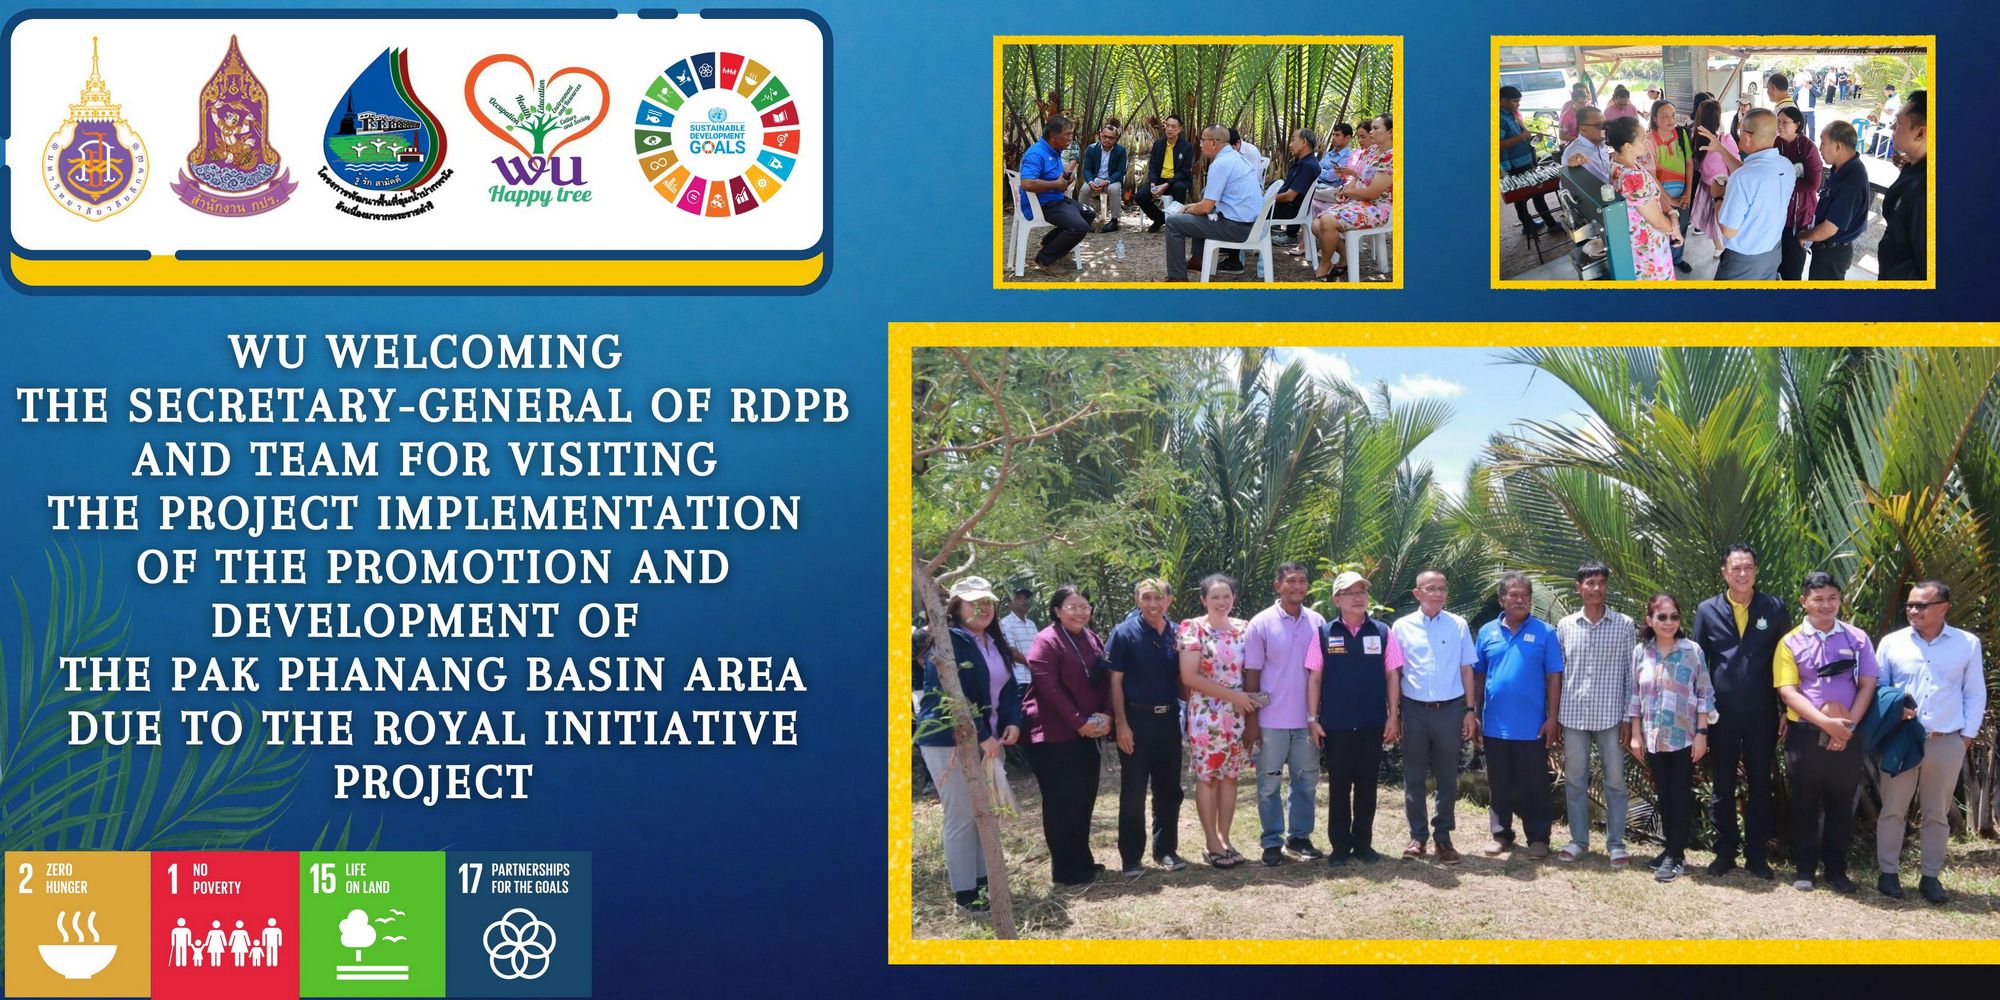 WU Welcoming the Secretary-General of RDPB and Team for Visiting the Project Implementation of the Promotion and Dev